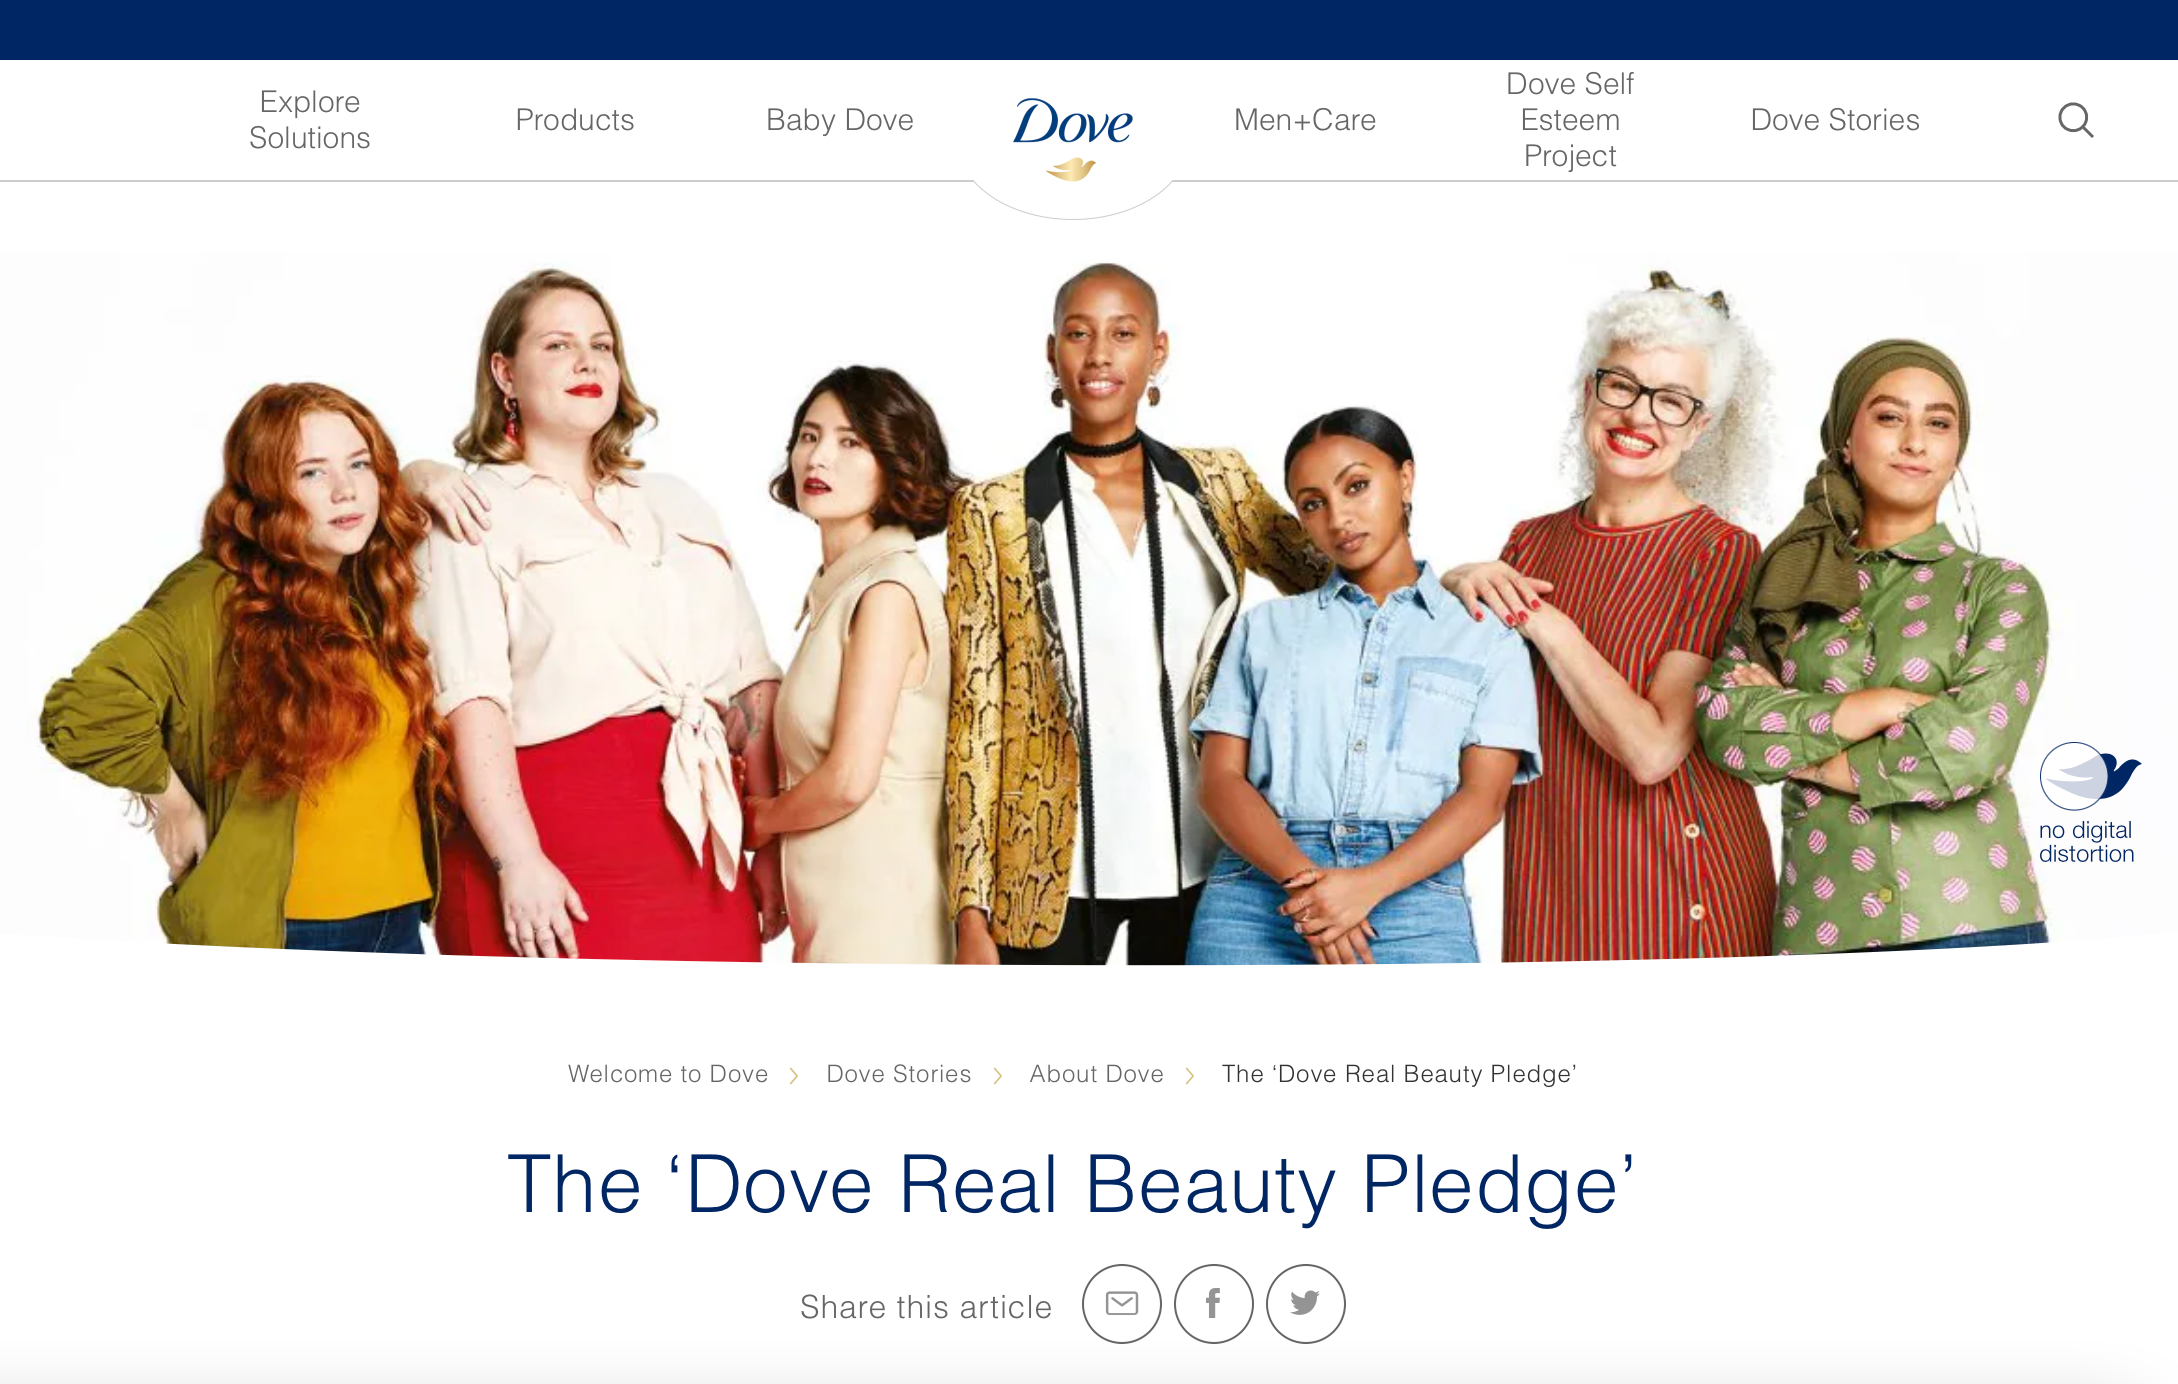 Dove marketers use empathy to connect with women and include real women in the production process of their ads.